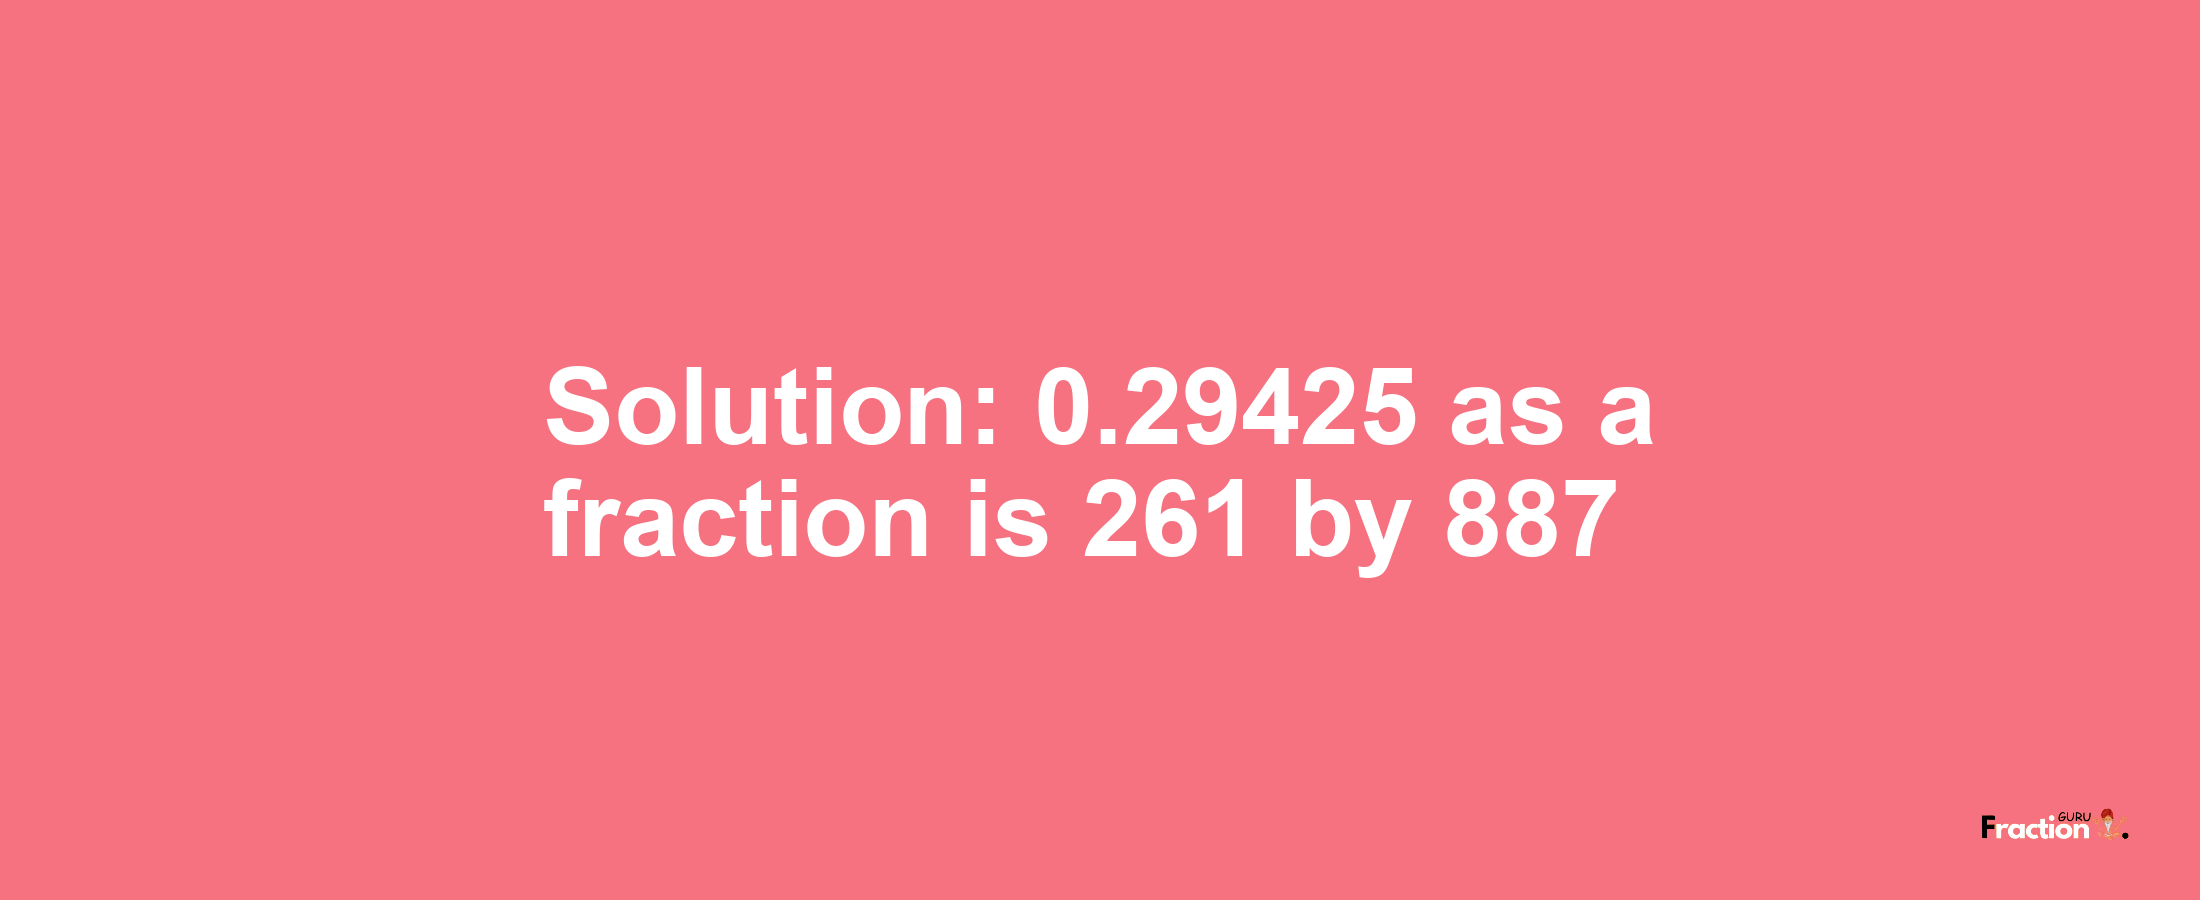 Solution:0.29425 as a fraction is 261/887